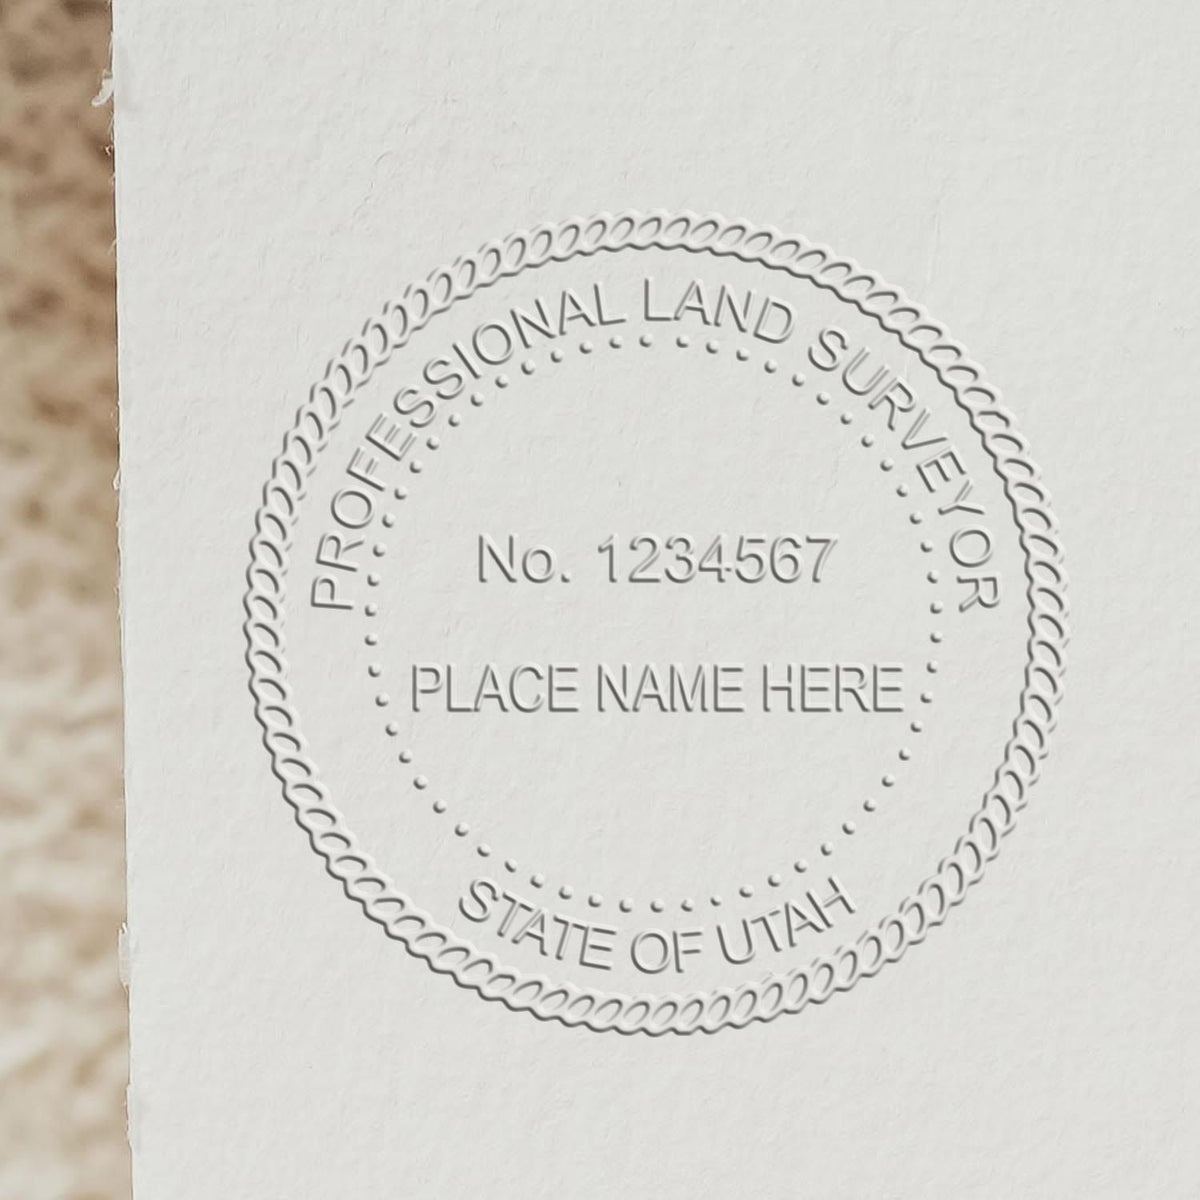 A photograph of the Hybrid Utah Land Surveyor Seal stamp impression reveals a vivid, professional image of the on paper.